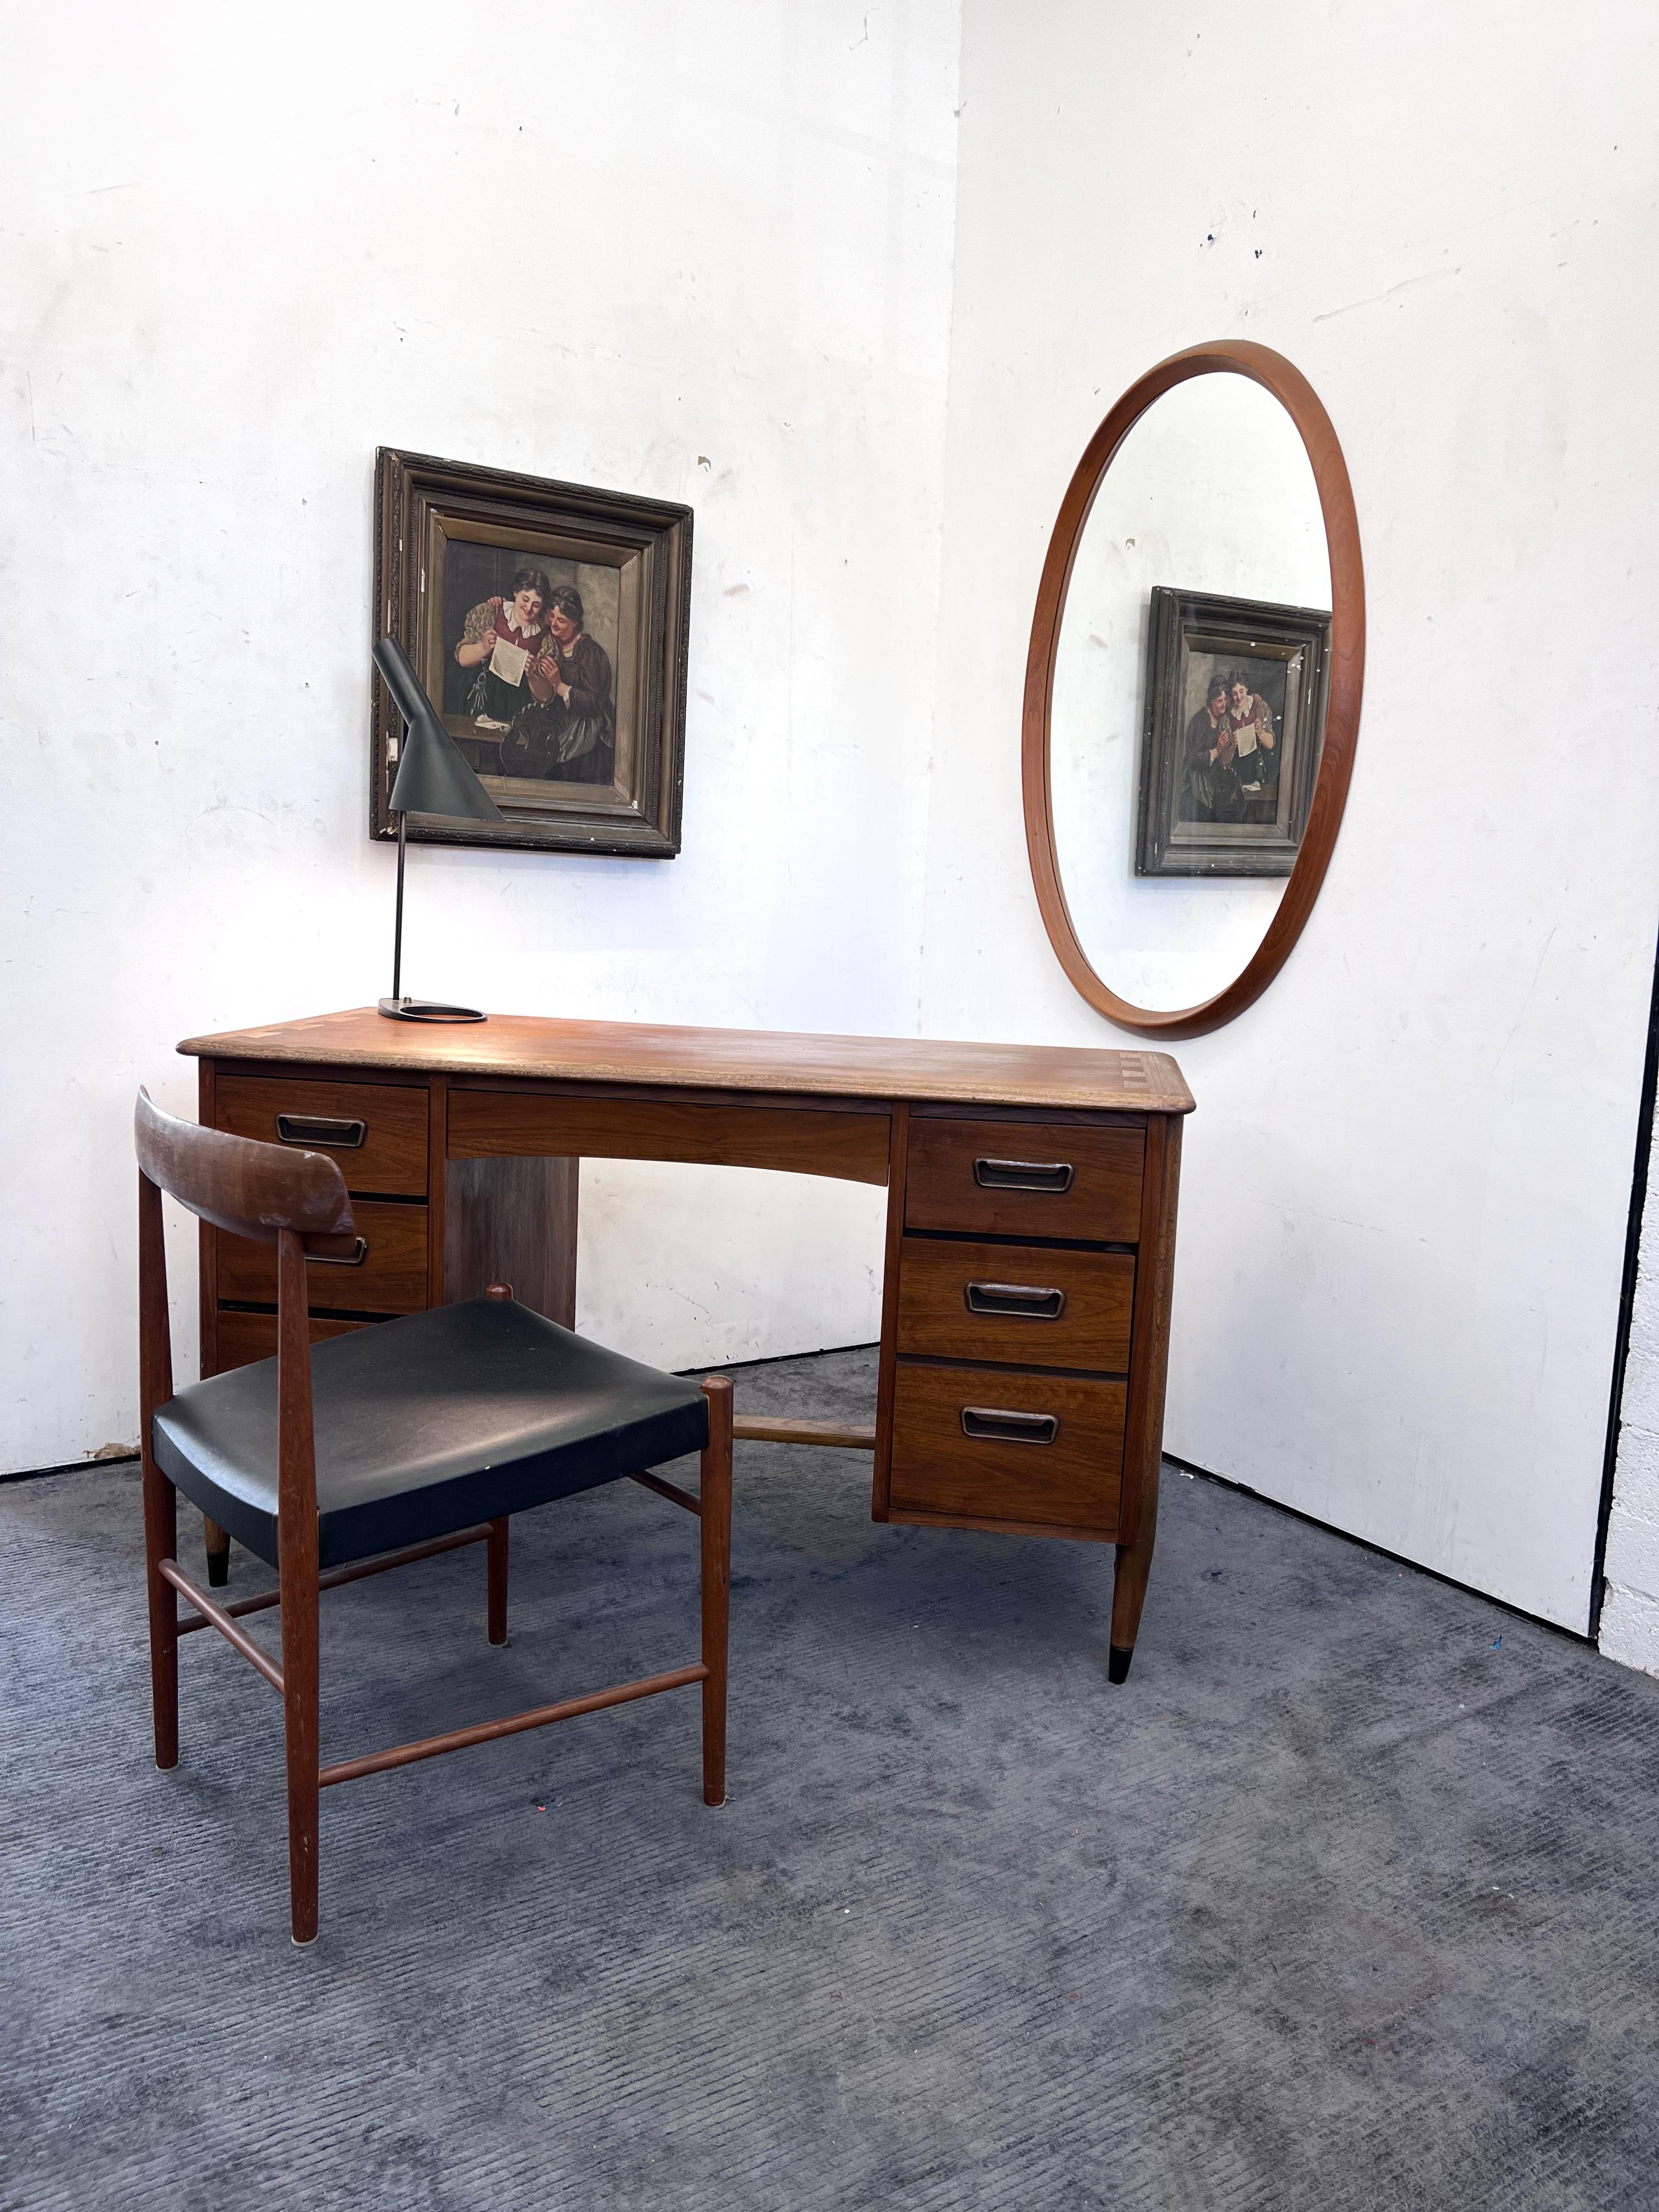 Mid Century Modern walnut Desk, Andre Bus for Lane Acclaim

1960s pedestal desk by Lane furniture company, from their “ Acclaim collection” with it’s signature dovetail inlays and two-tone design. 
Designed by Andre Bus. 

The bottom drawer on the